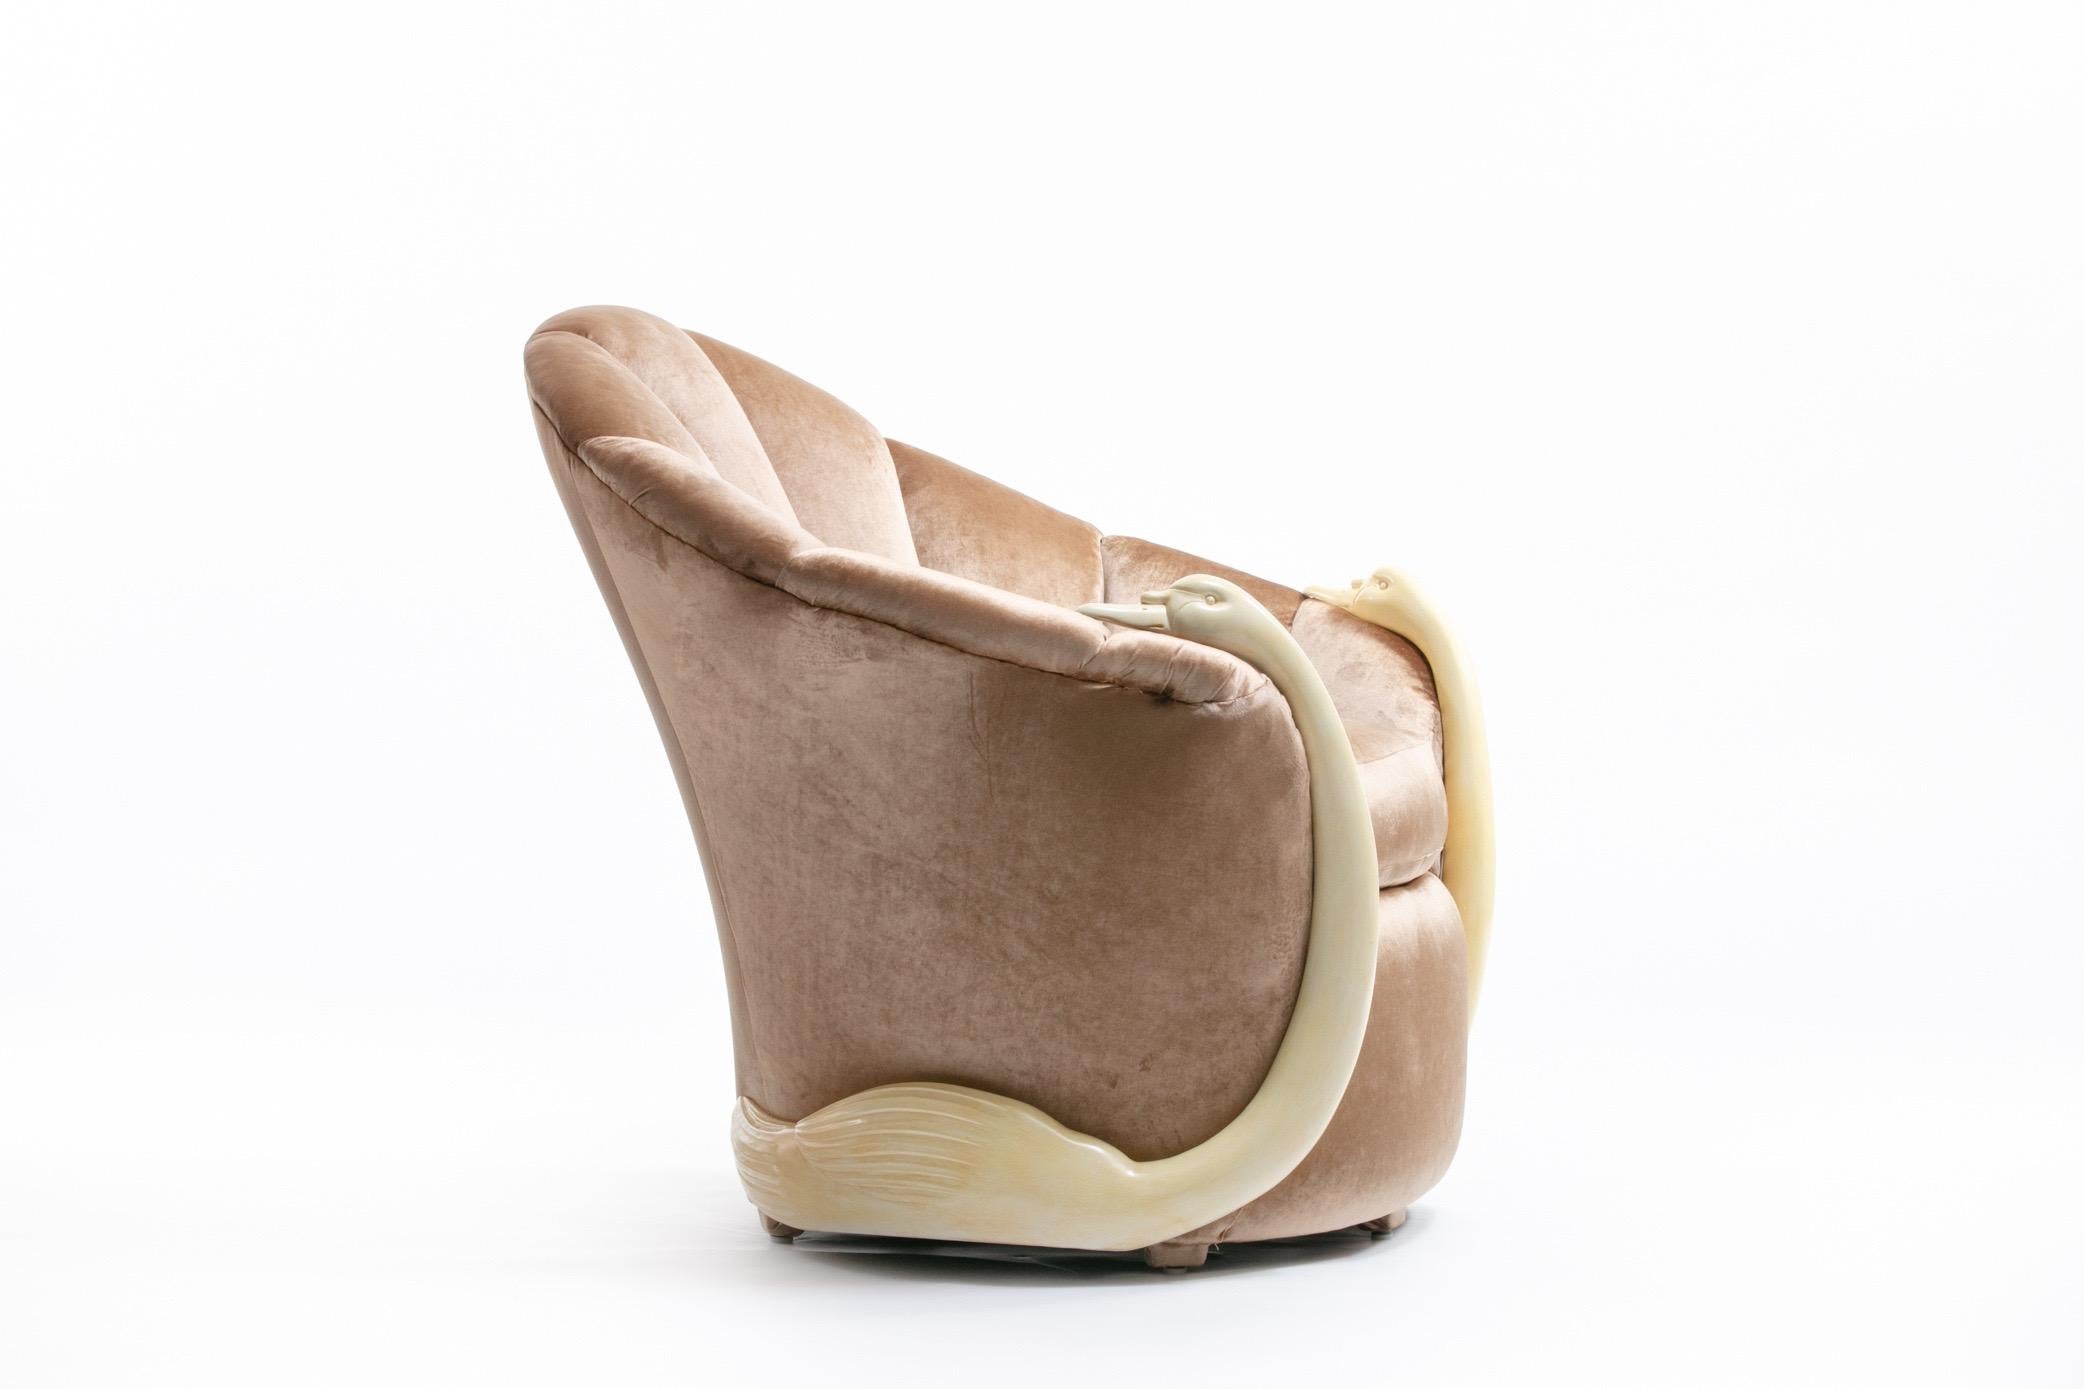 Parchment Paper Suzanne Geismar Swan Leda Lounge Chairs in Mink Velvet and Ivory Parchment Swans For Sale